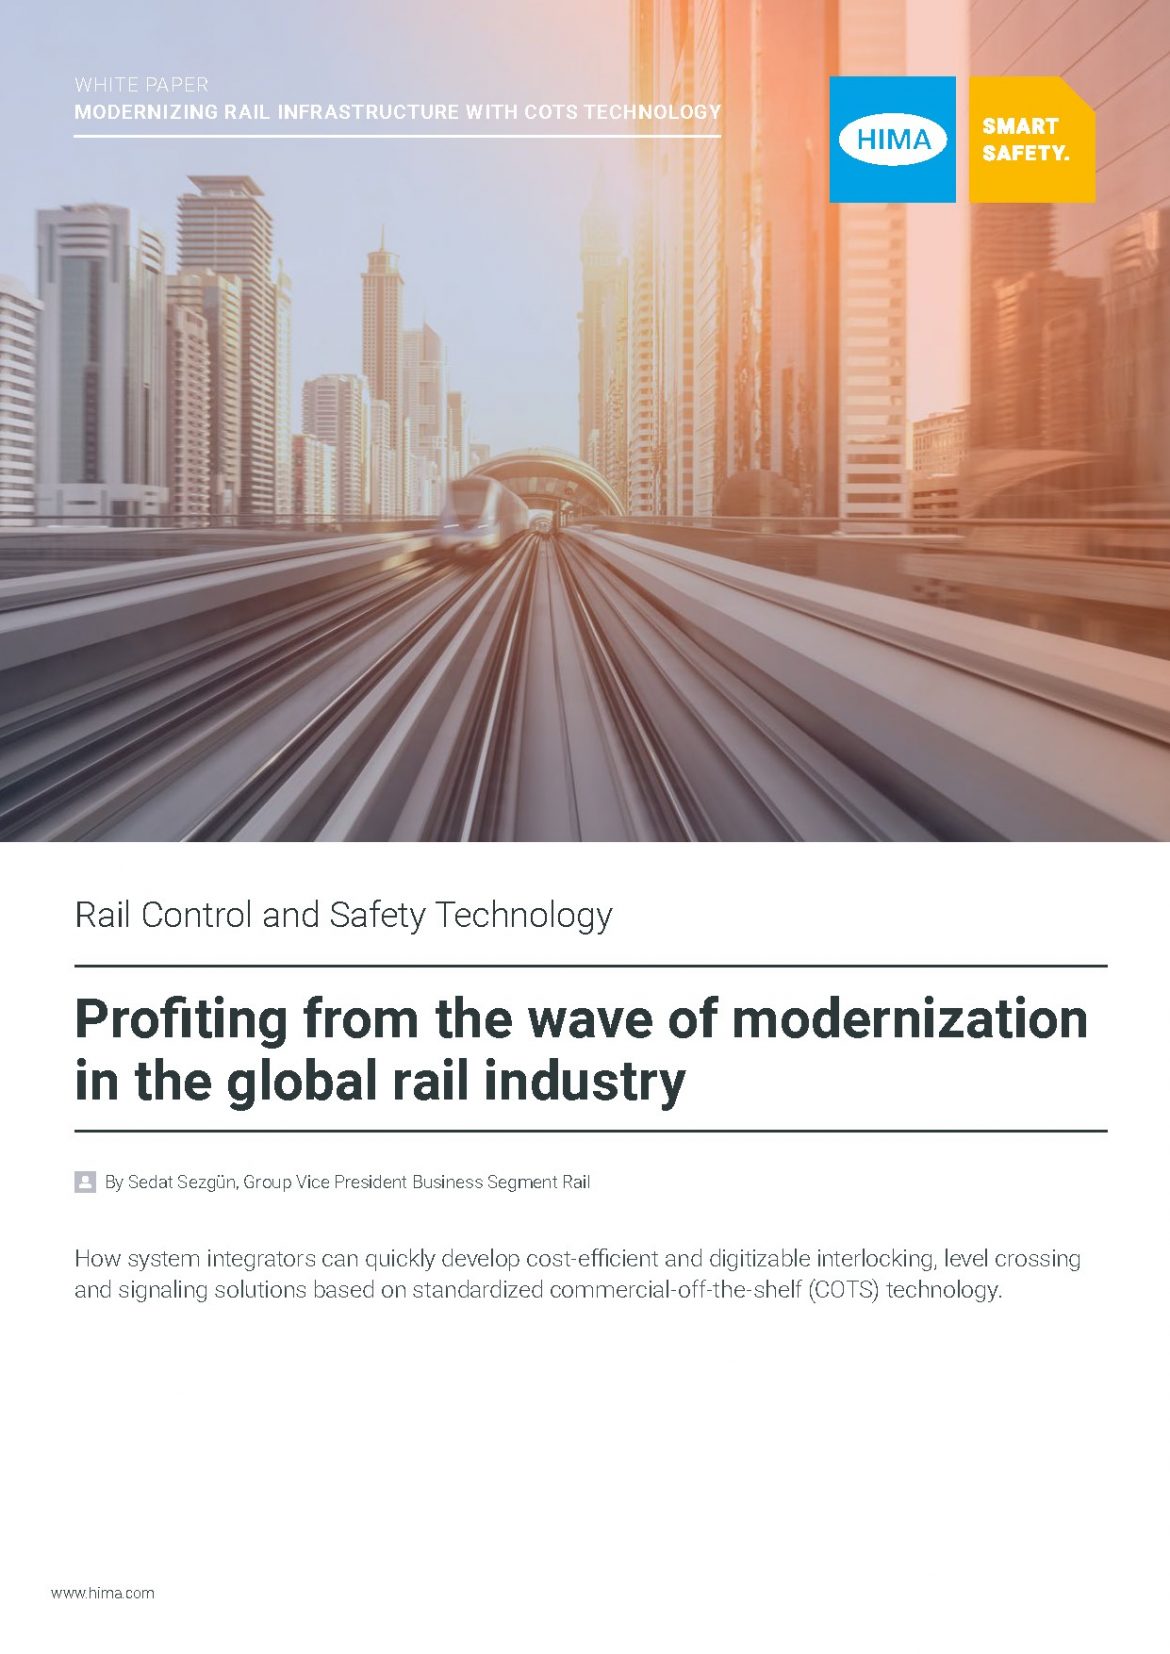 Profiting from the wave of modernization in the global rail industry